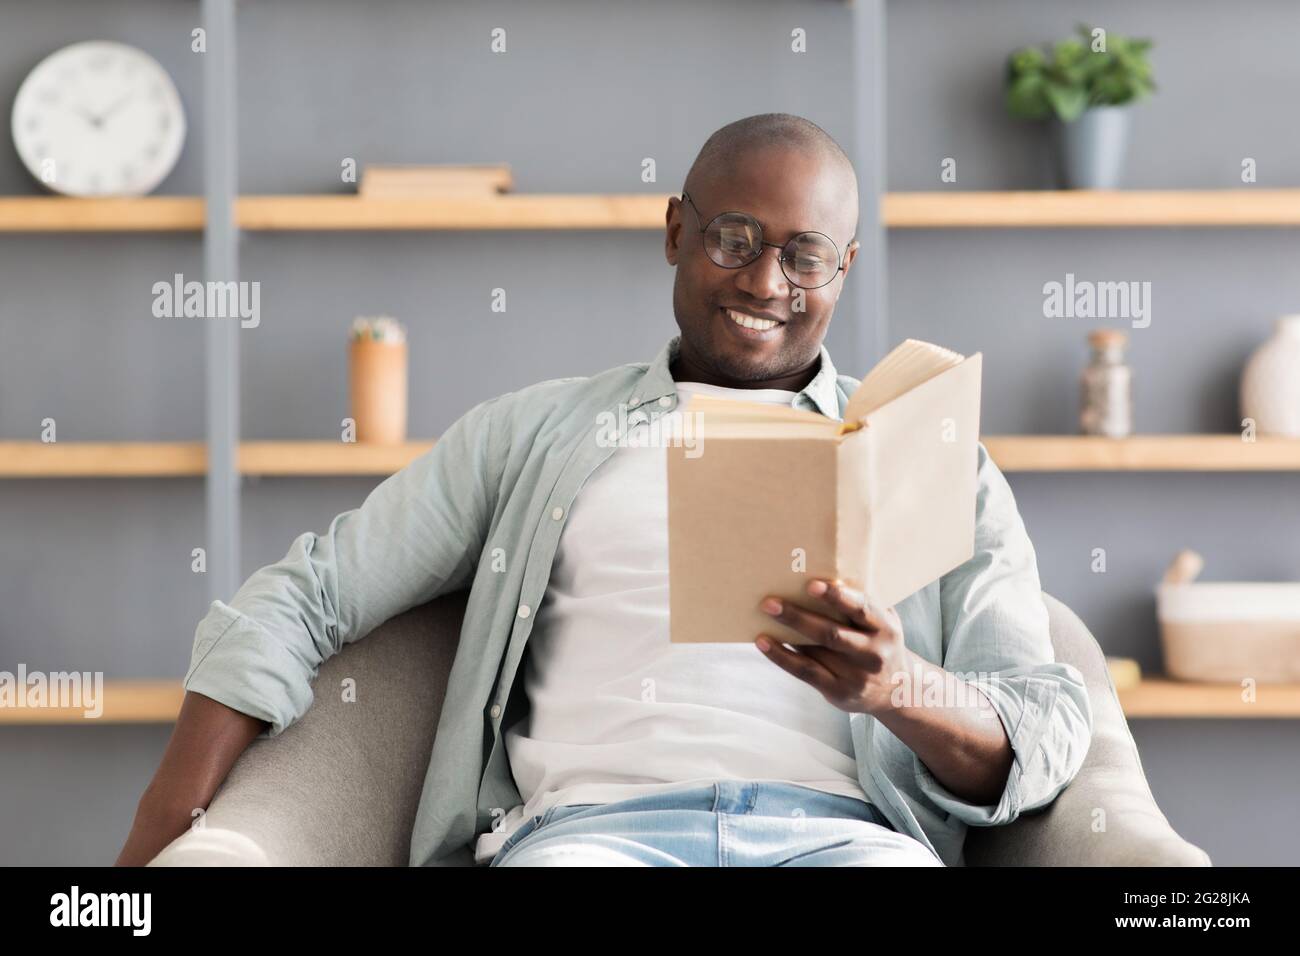 Stay home pastimes. Happy african american mature man enjoying reading book, sitting in comfy armchair, free space Stock Photo